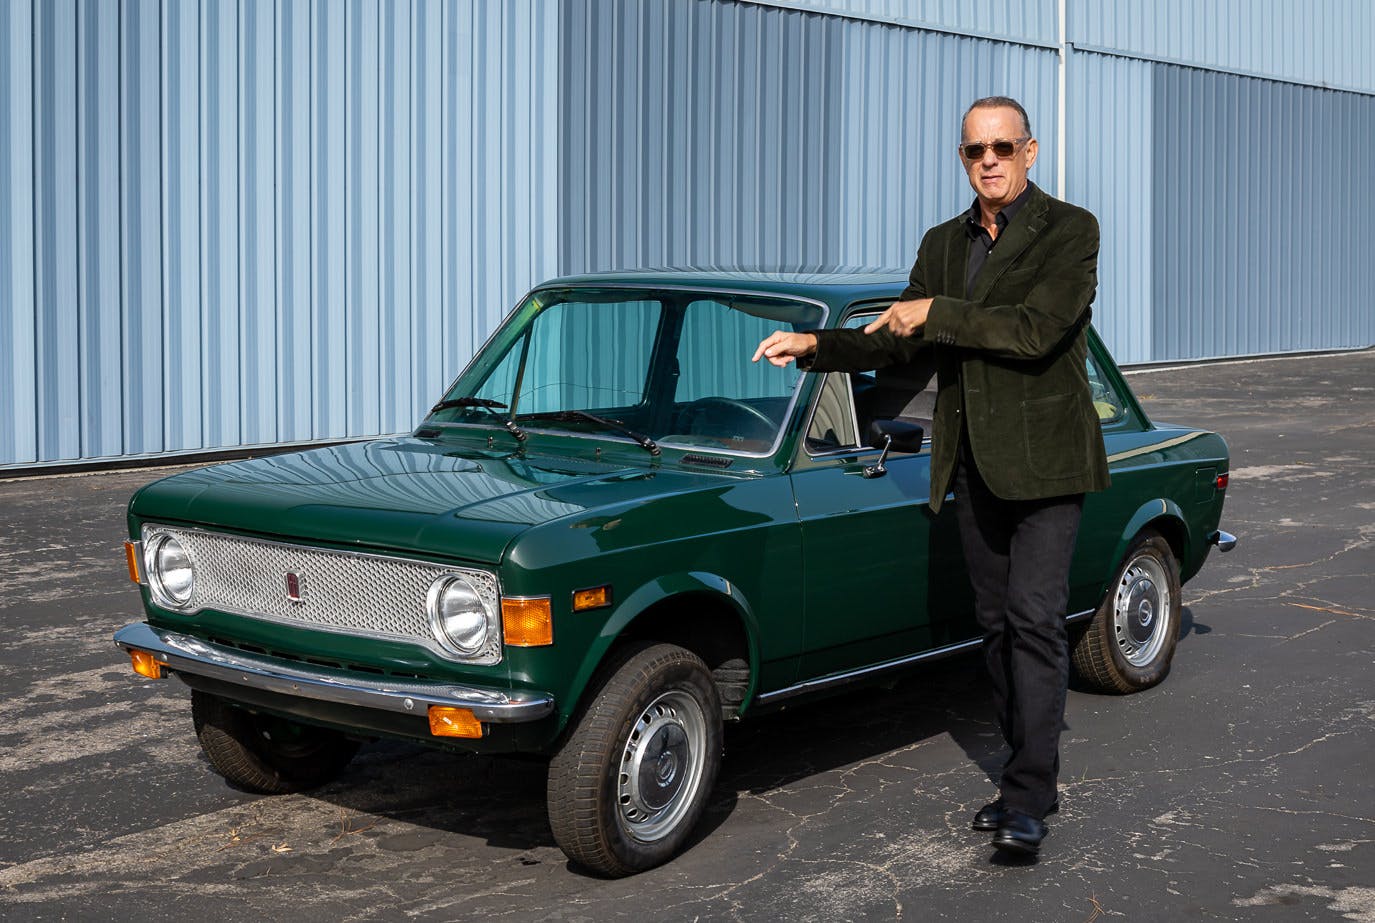 Tom Hanks and his Fiat 128 front